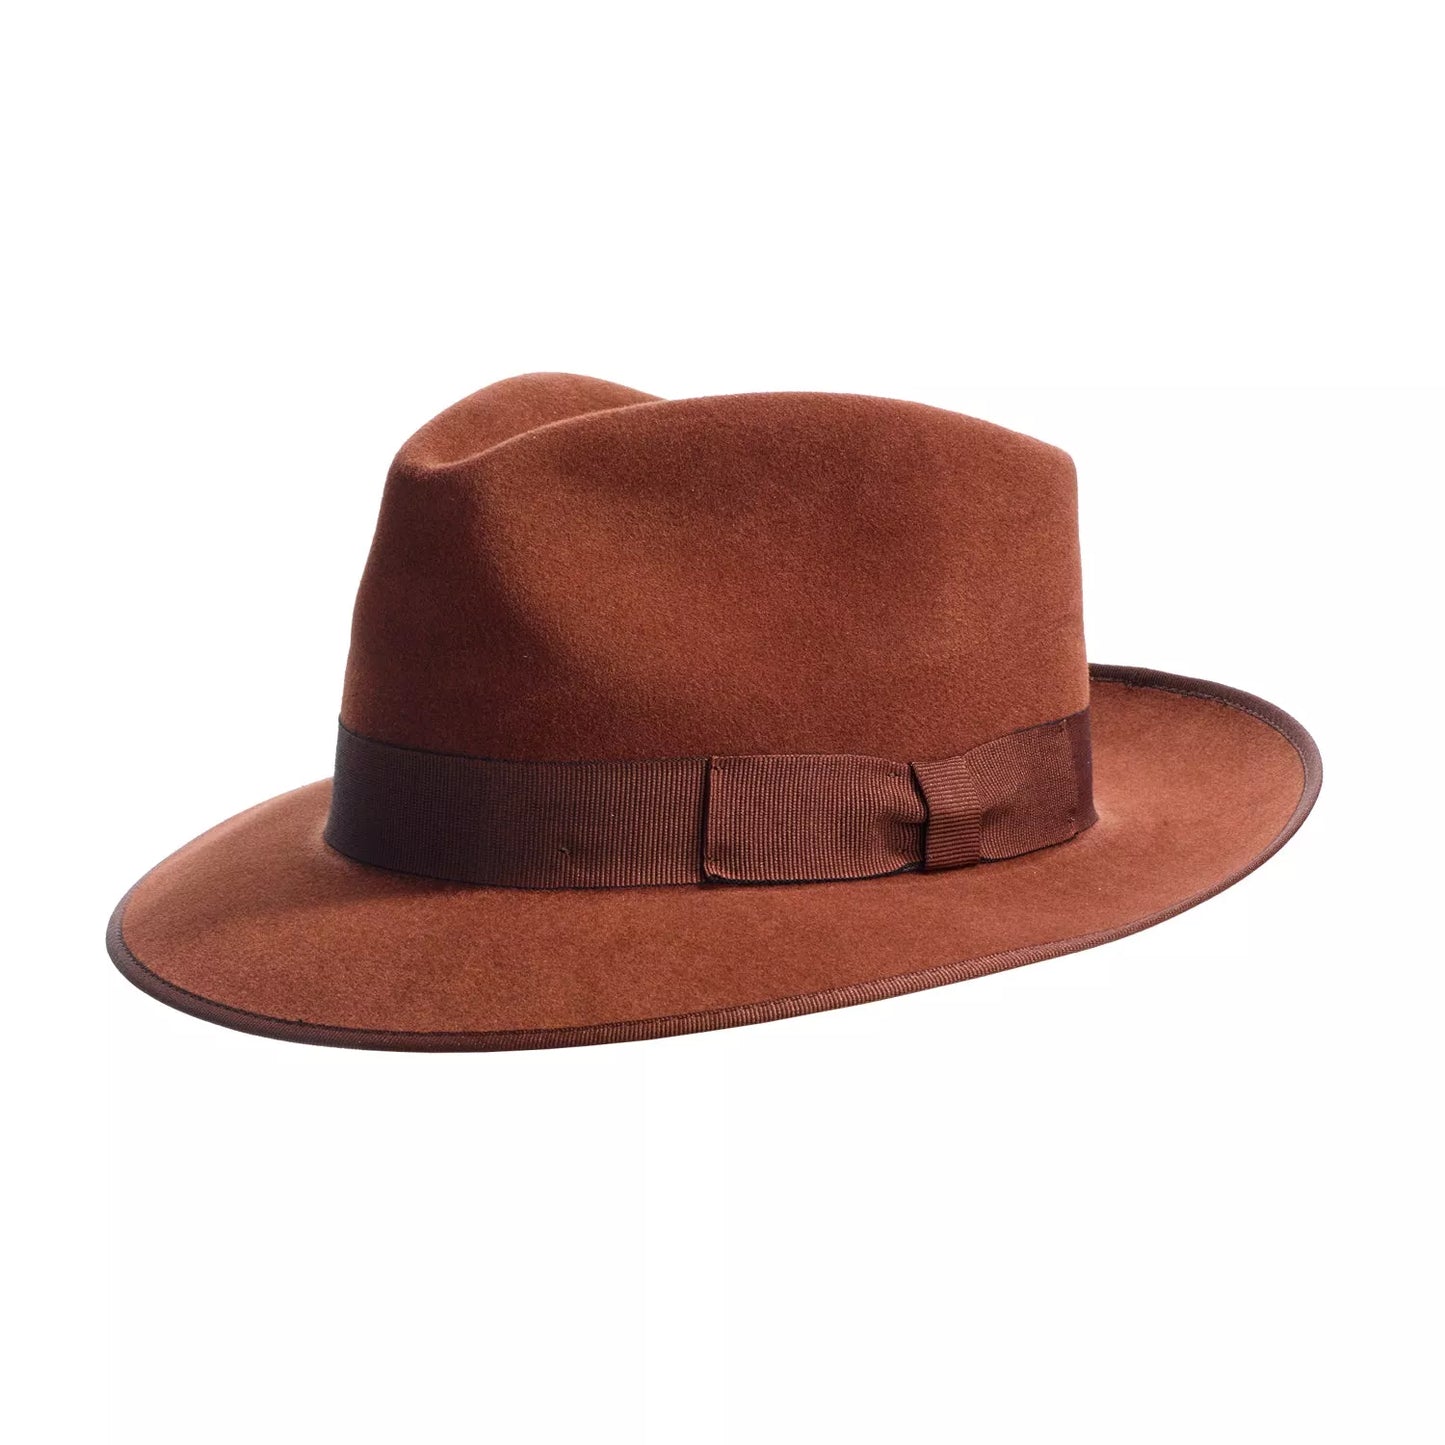 Alfred trilby hat tan